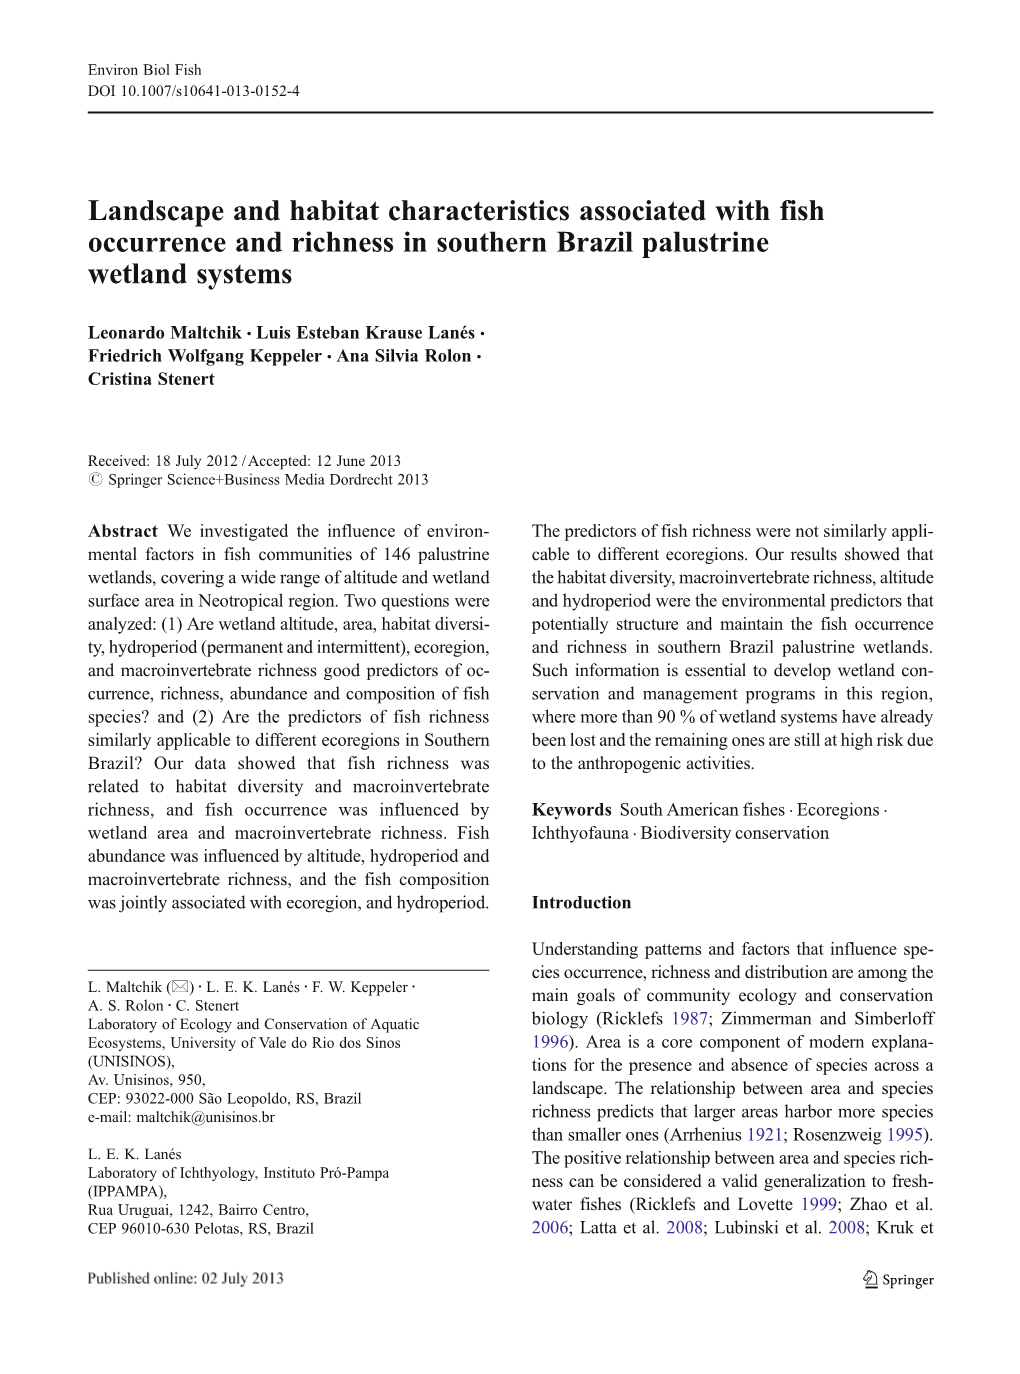 Landscape and Habitat Characteristics Associated with Fish Occurrence and Richness in Southern Brazil Palustrine Wetland Systems